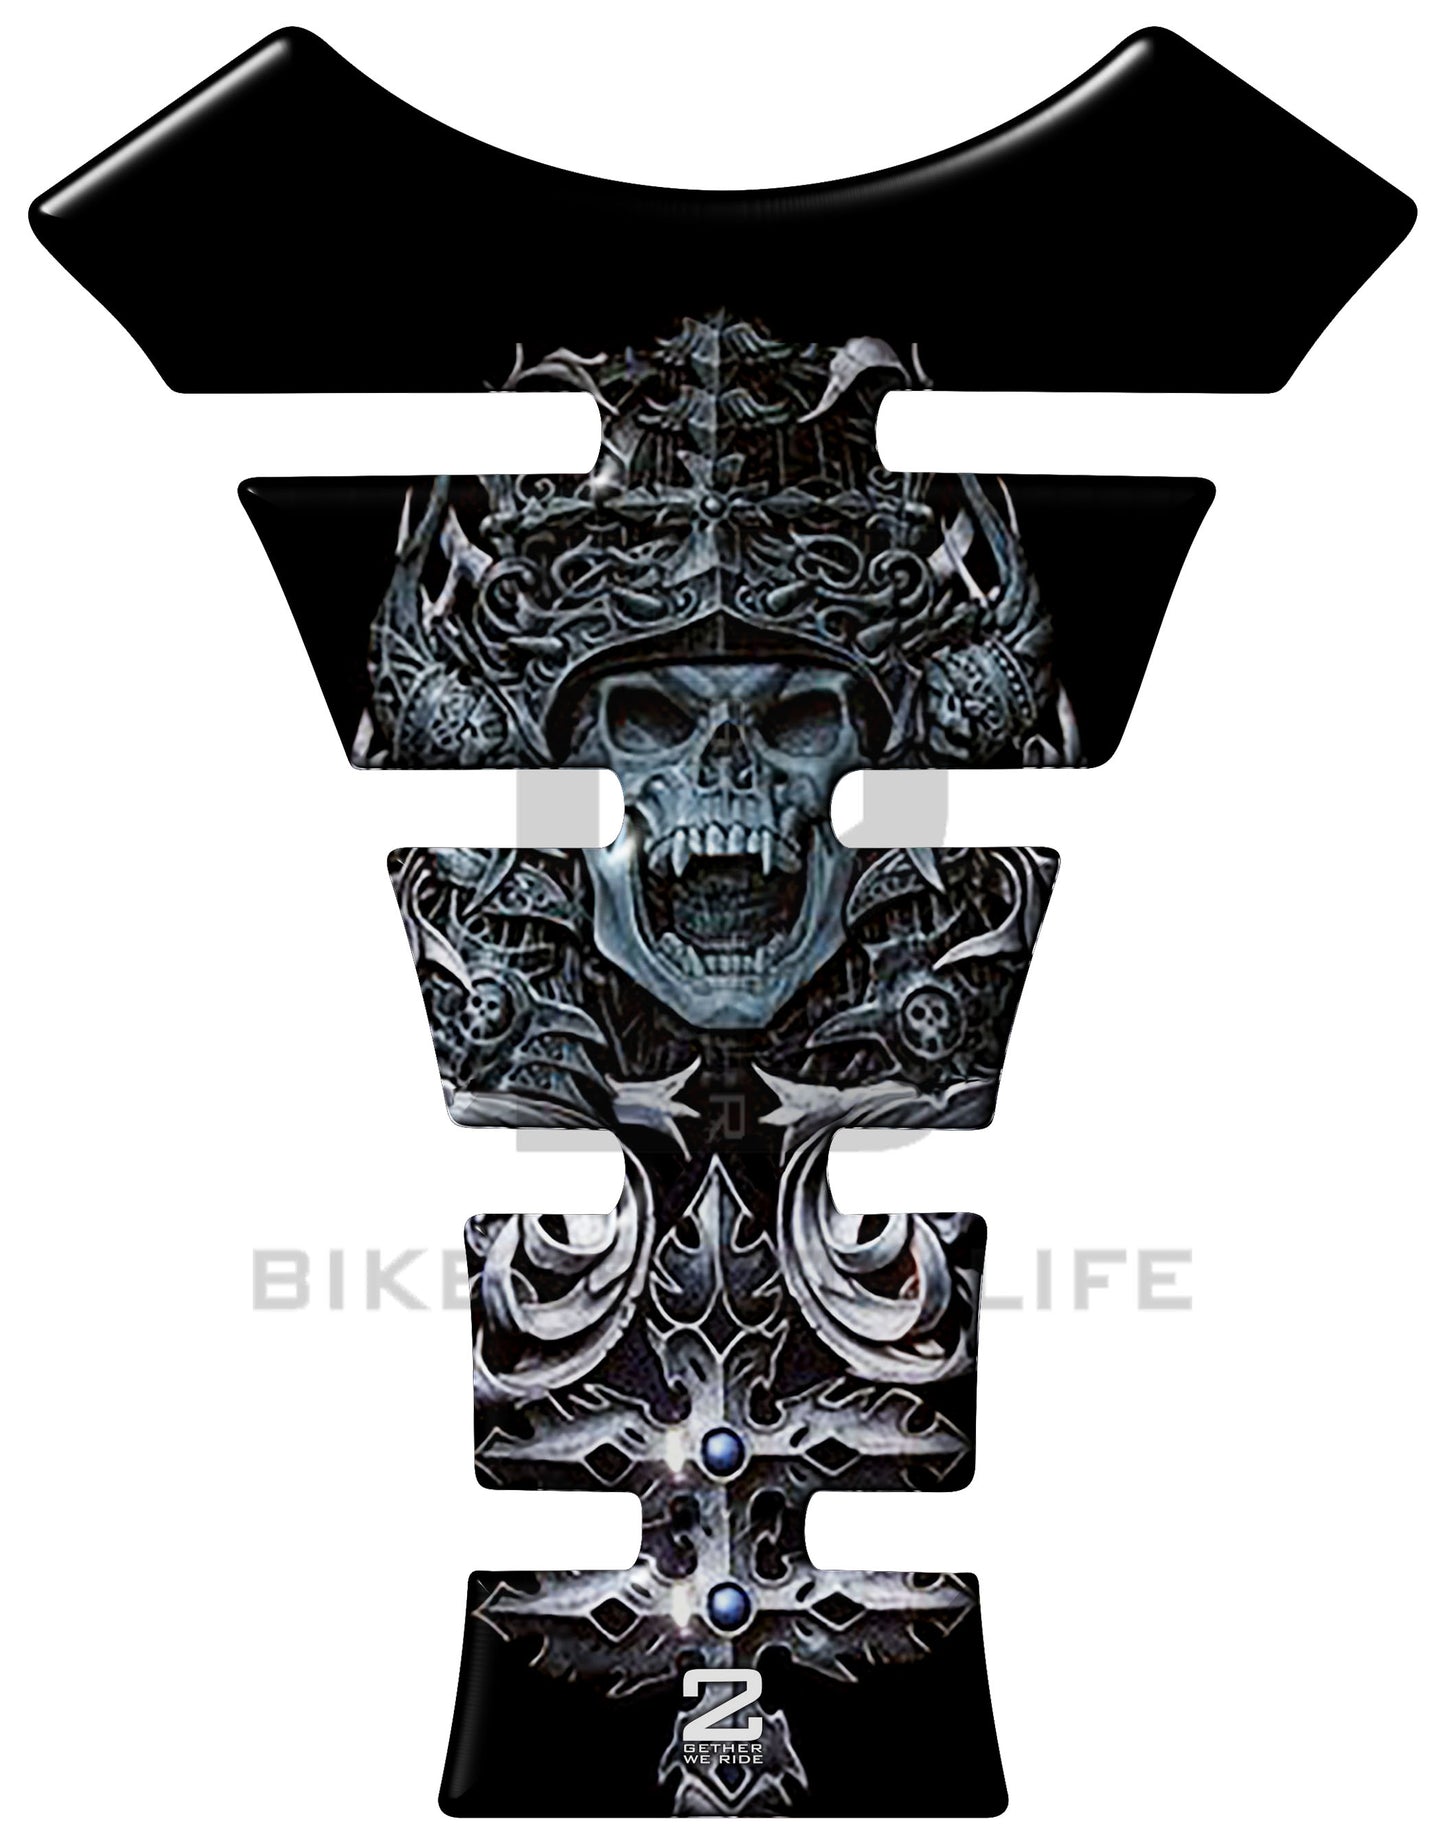 Universal Fit Black Mayan Skull Tank Pad. A Street Pad which fits most motorcycles.